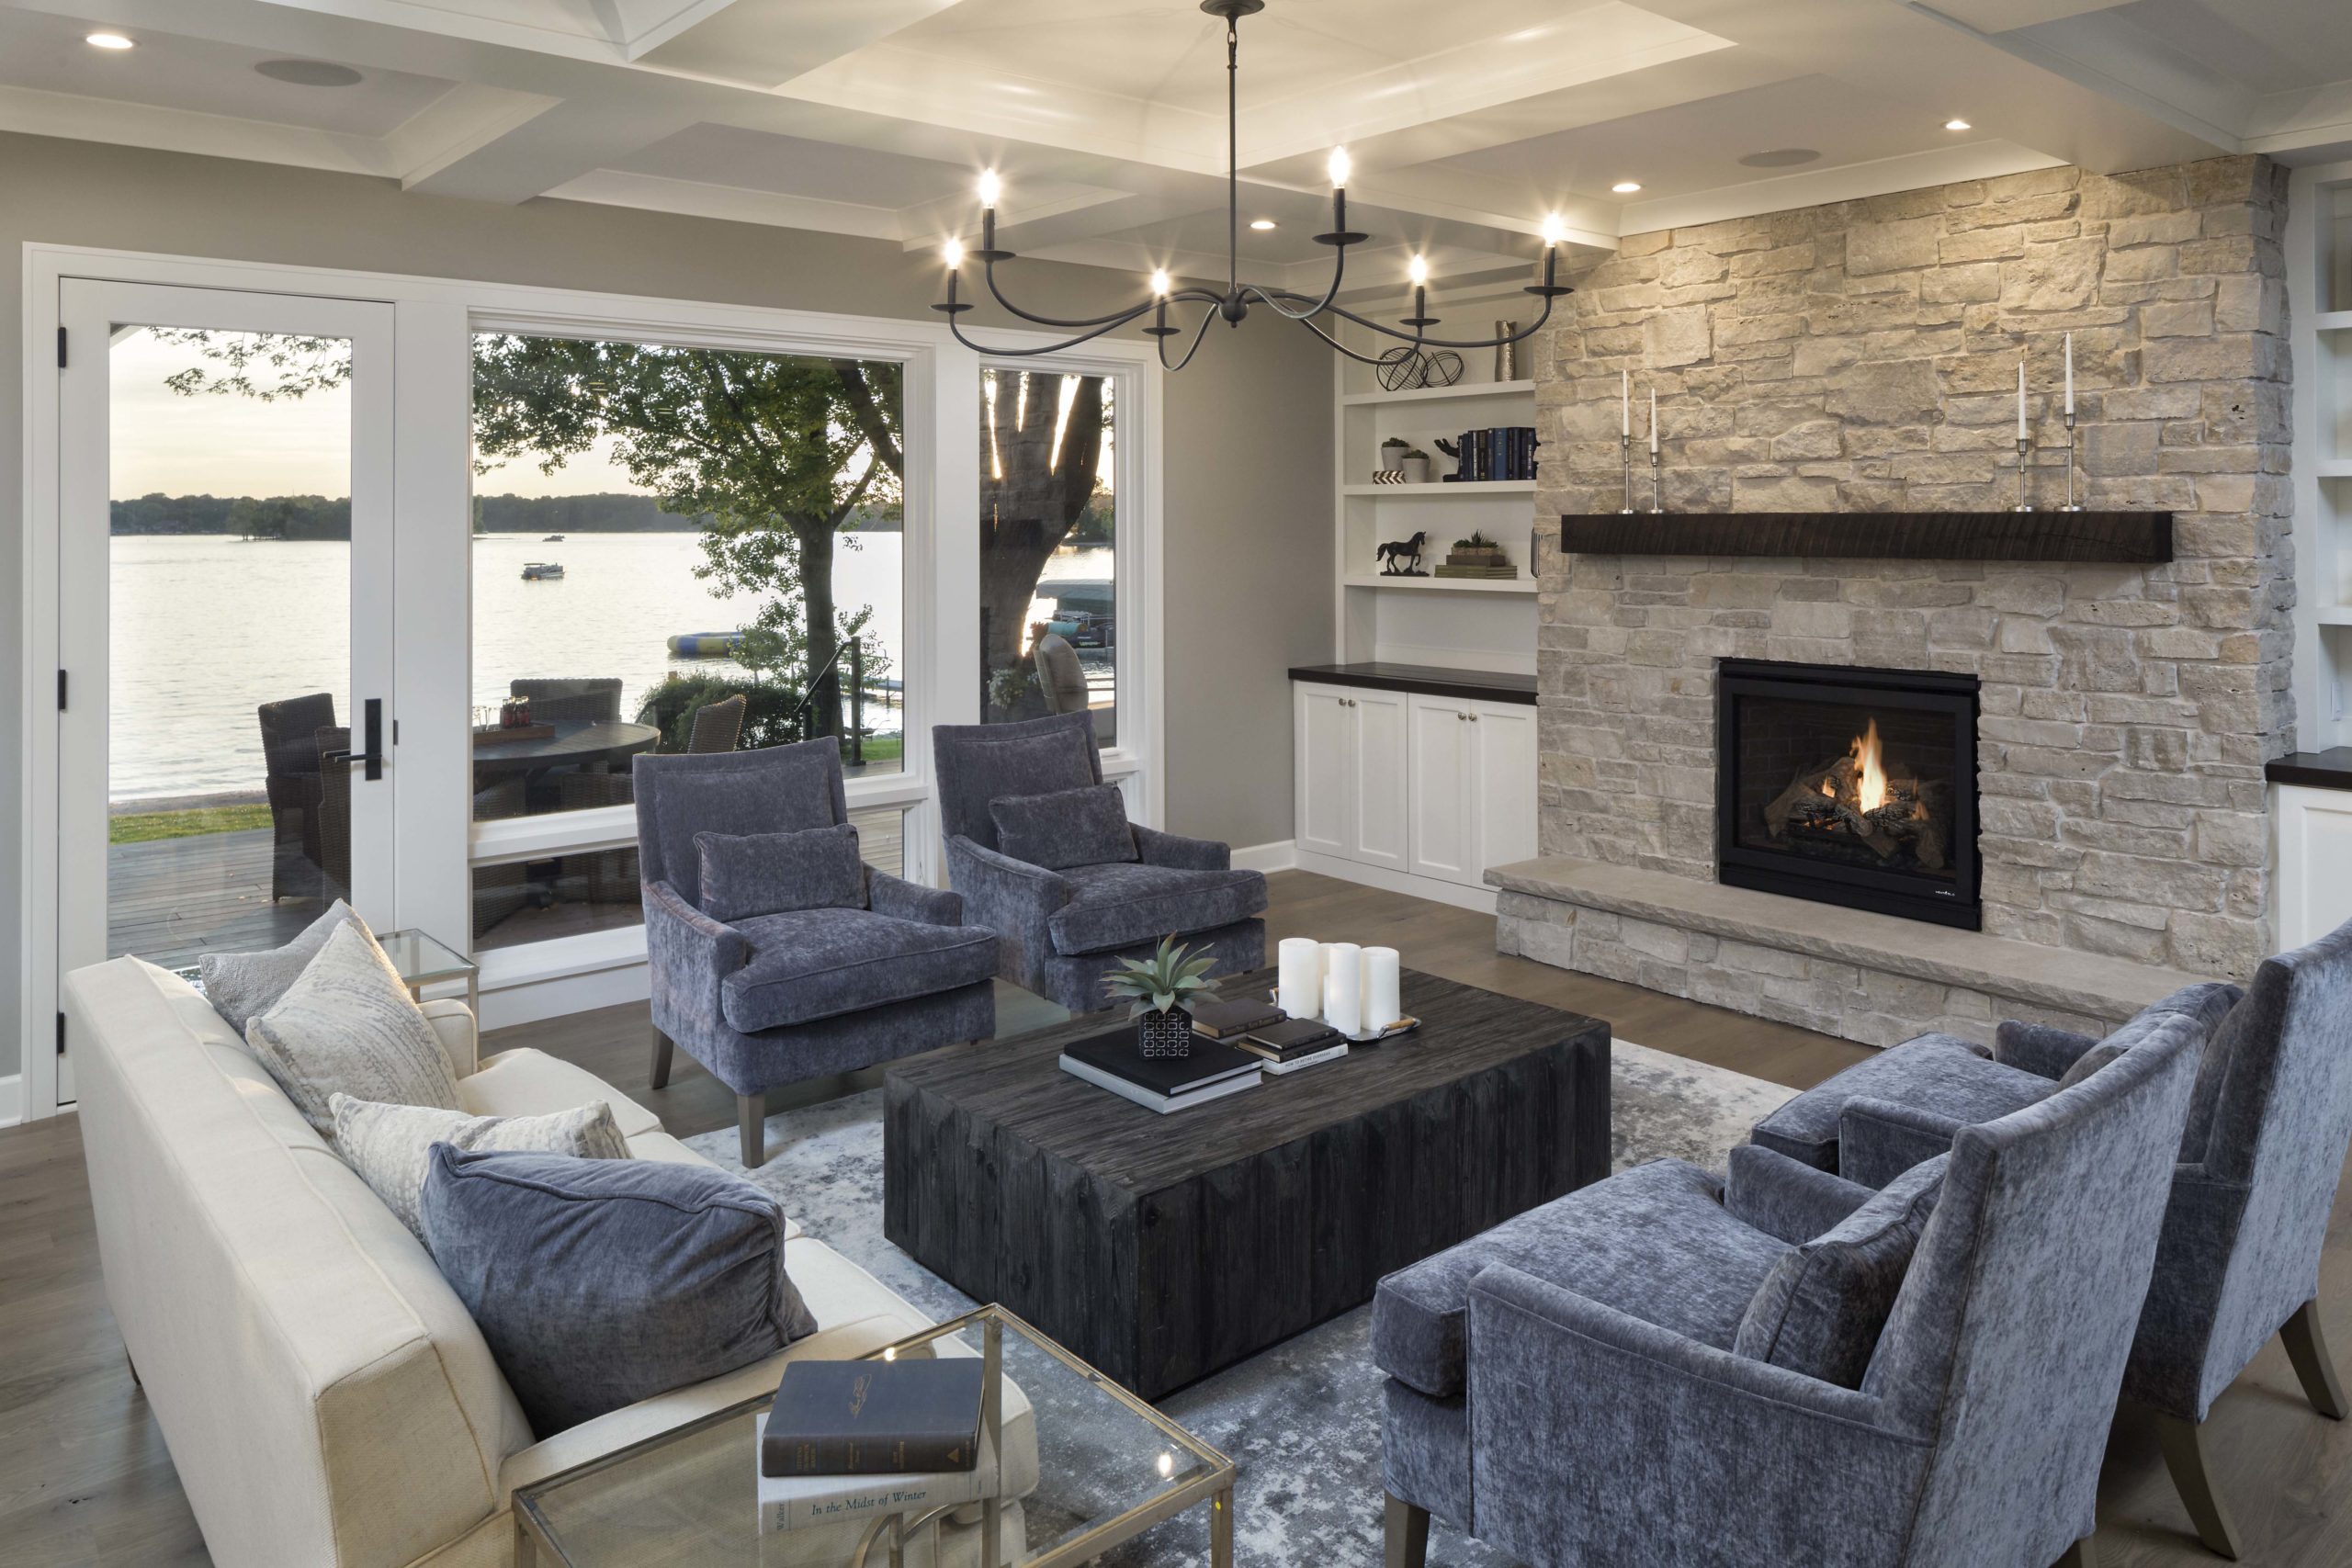 A living room with a fireplace and a view of the lake.